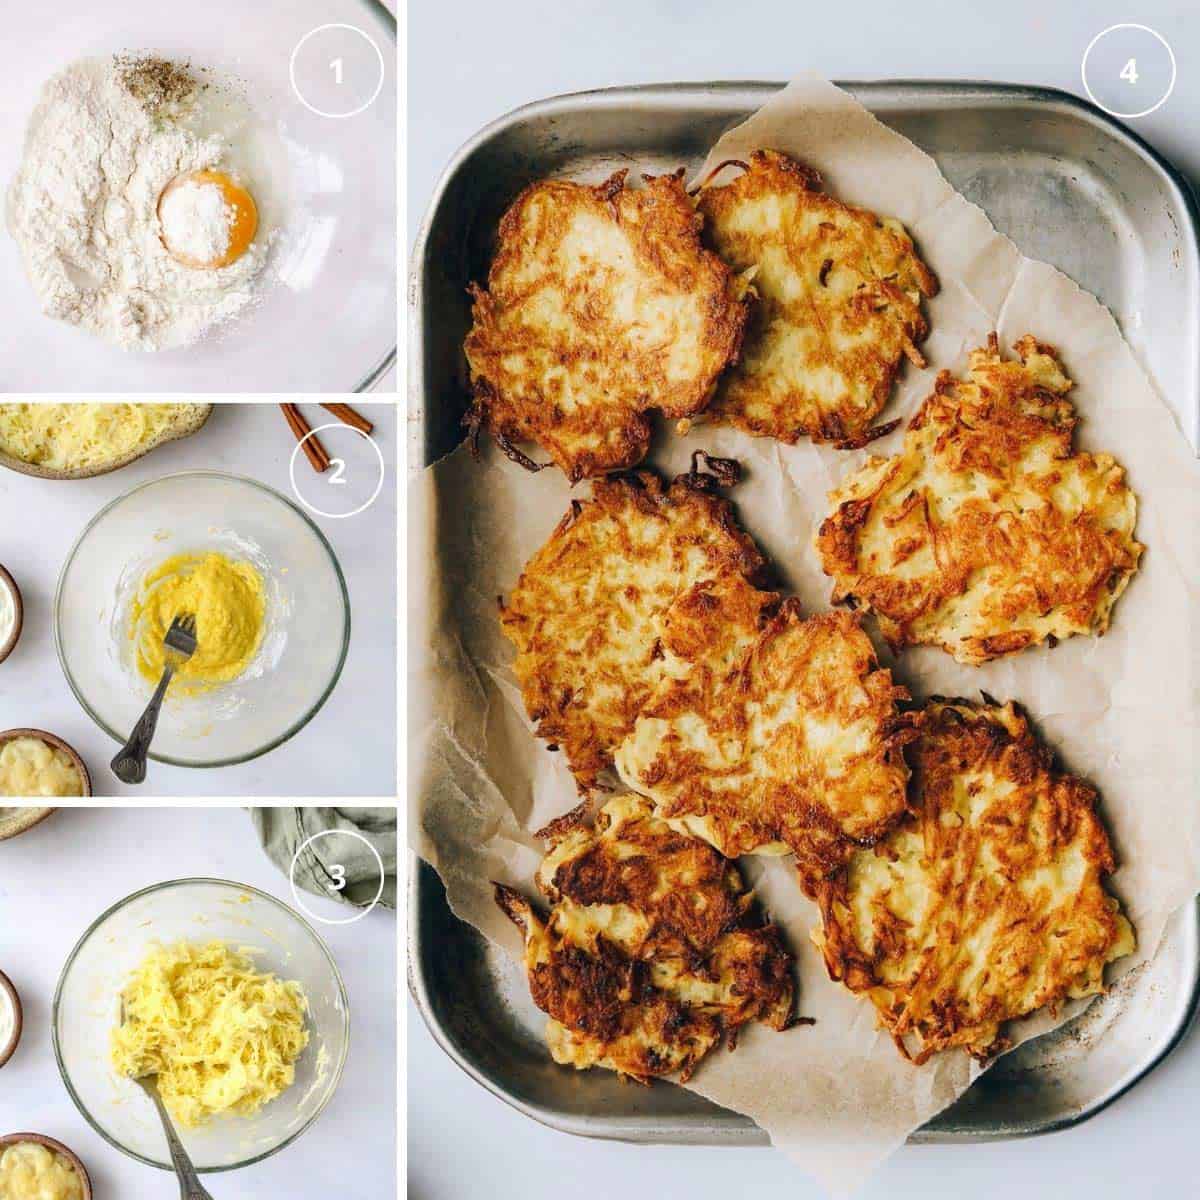 Steps to making potato pancakes, the bowl with egg and flour, with shredded potatoes, and cakes draining on paper.